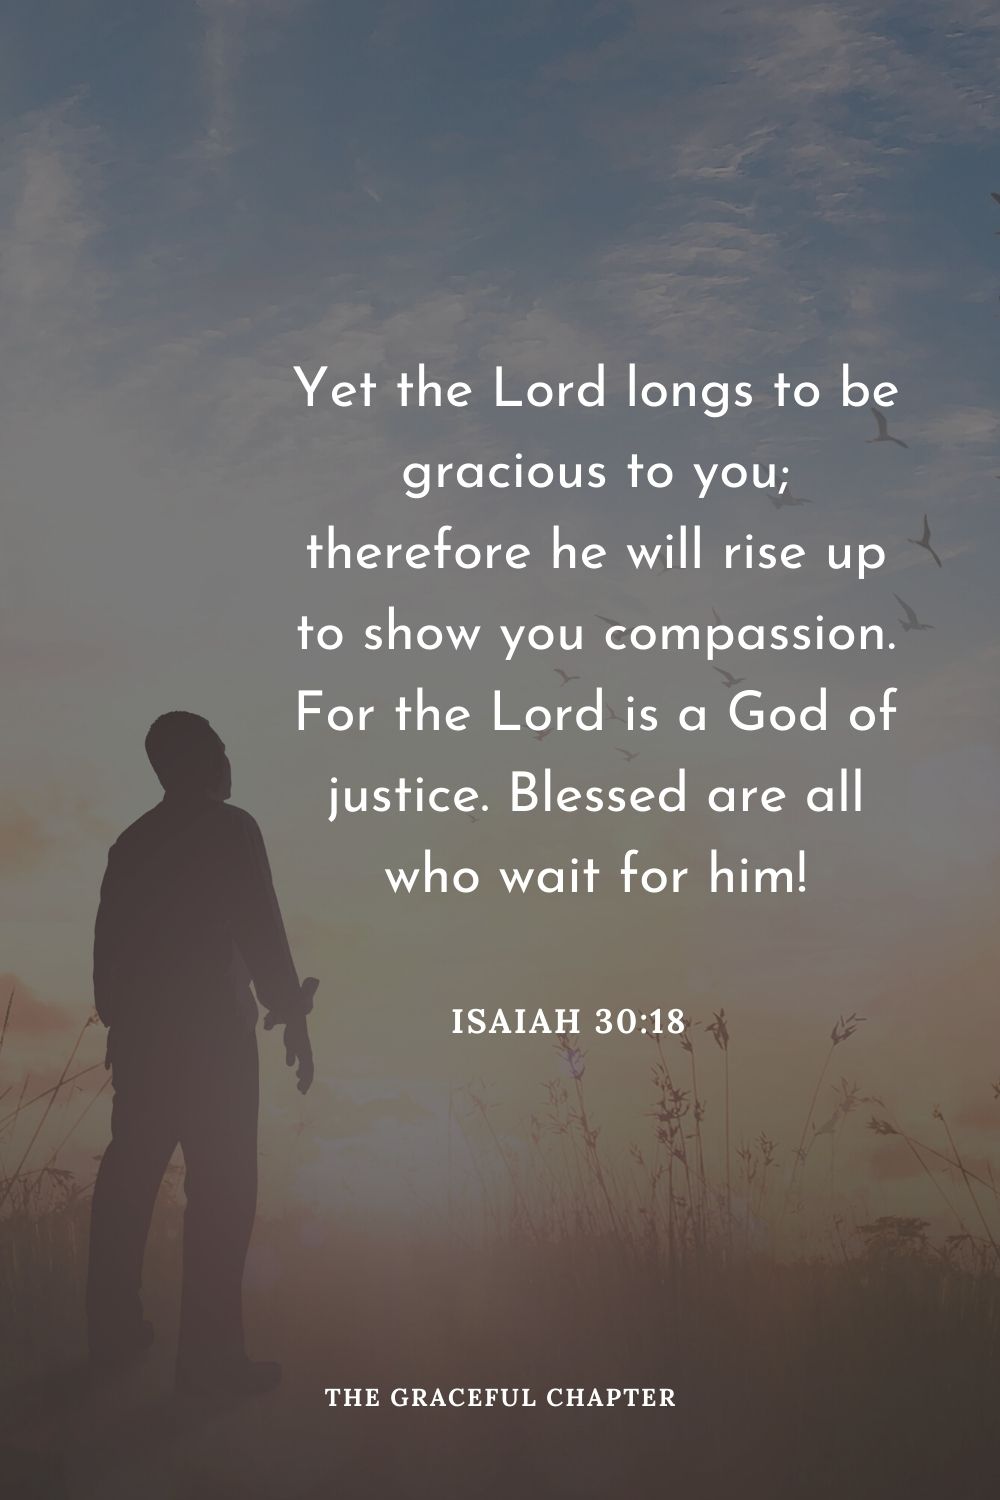 Yet the Lord longs to be gracious to you; therefore he will rise up to show you compassion. For the Lord is a God of justice. Blessed are all who wait for him!